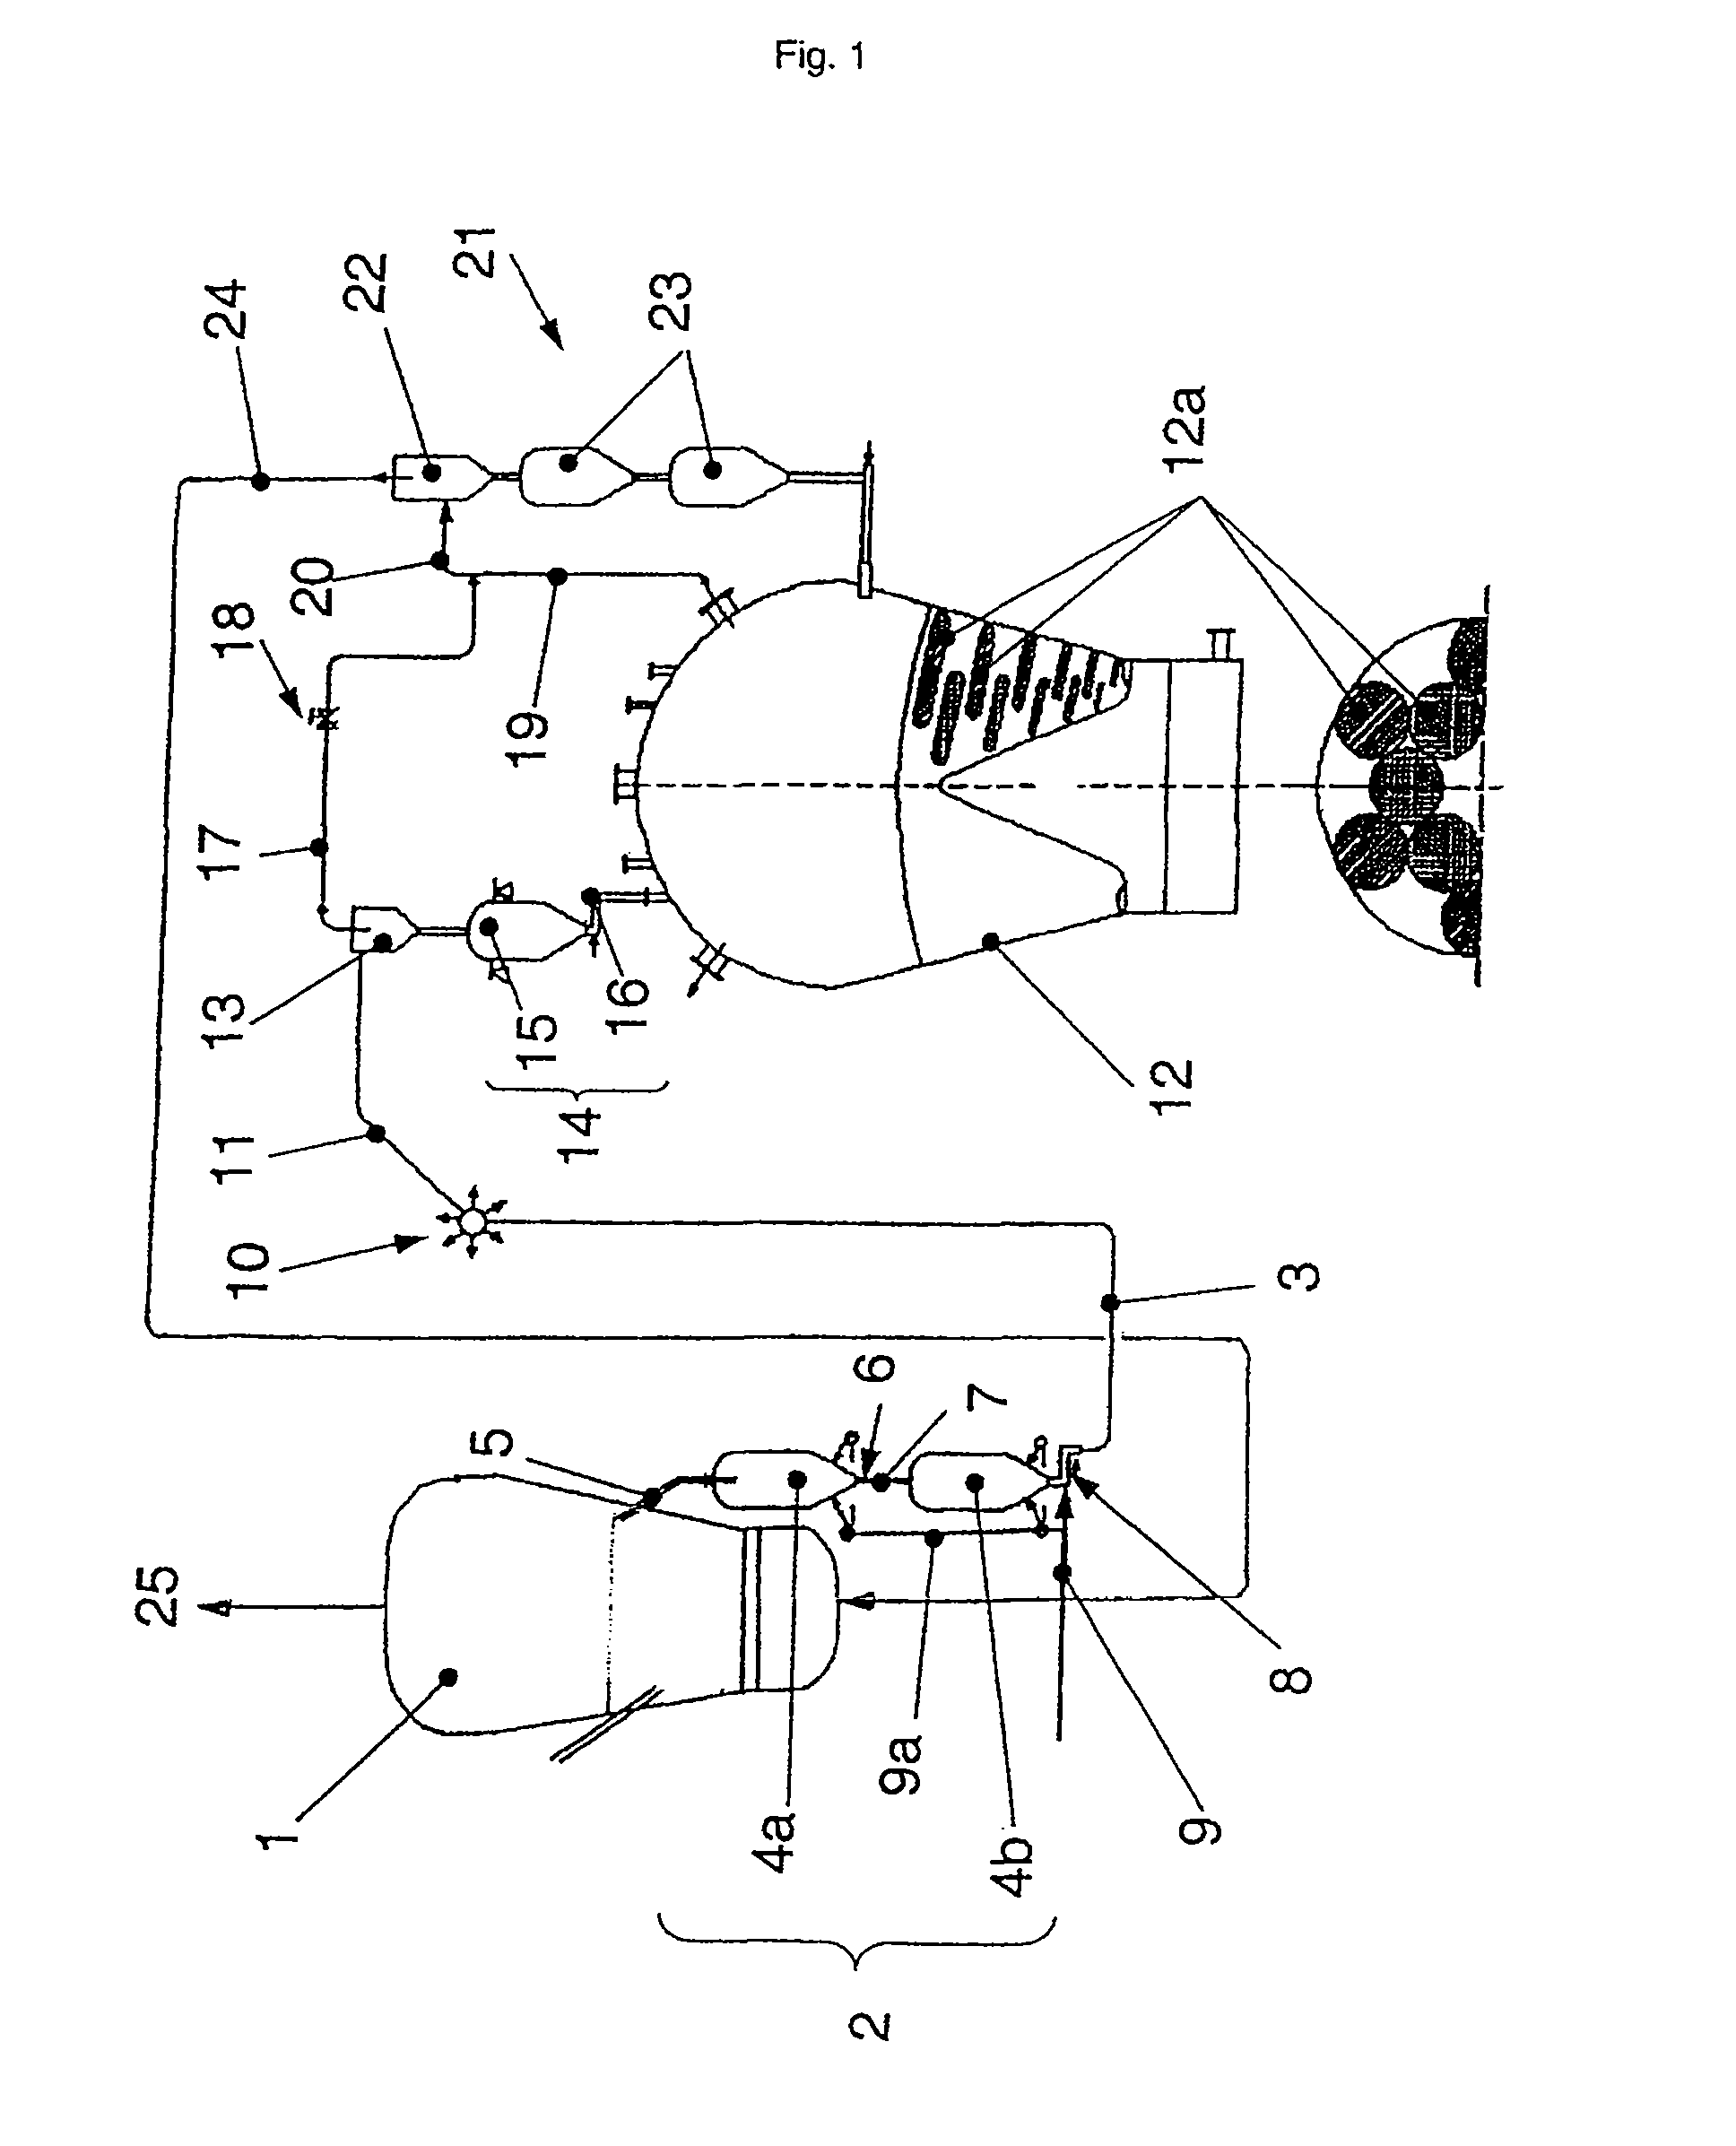 Process and apparatus for producing metals and/or primary metal products